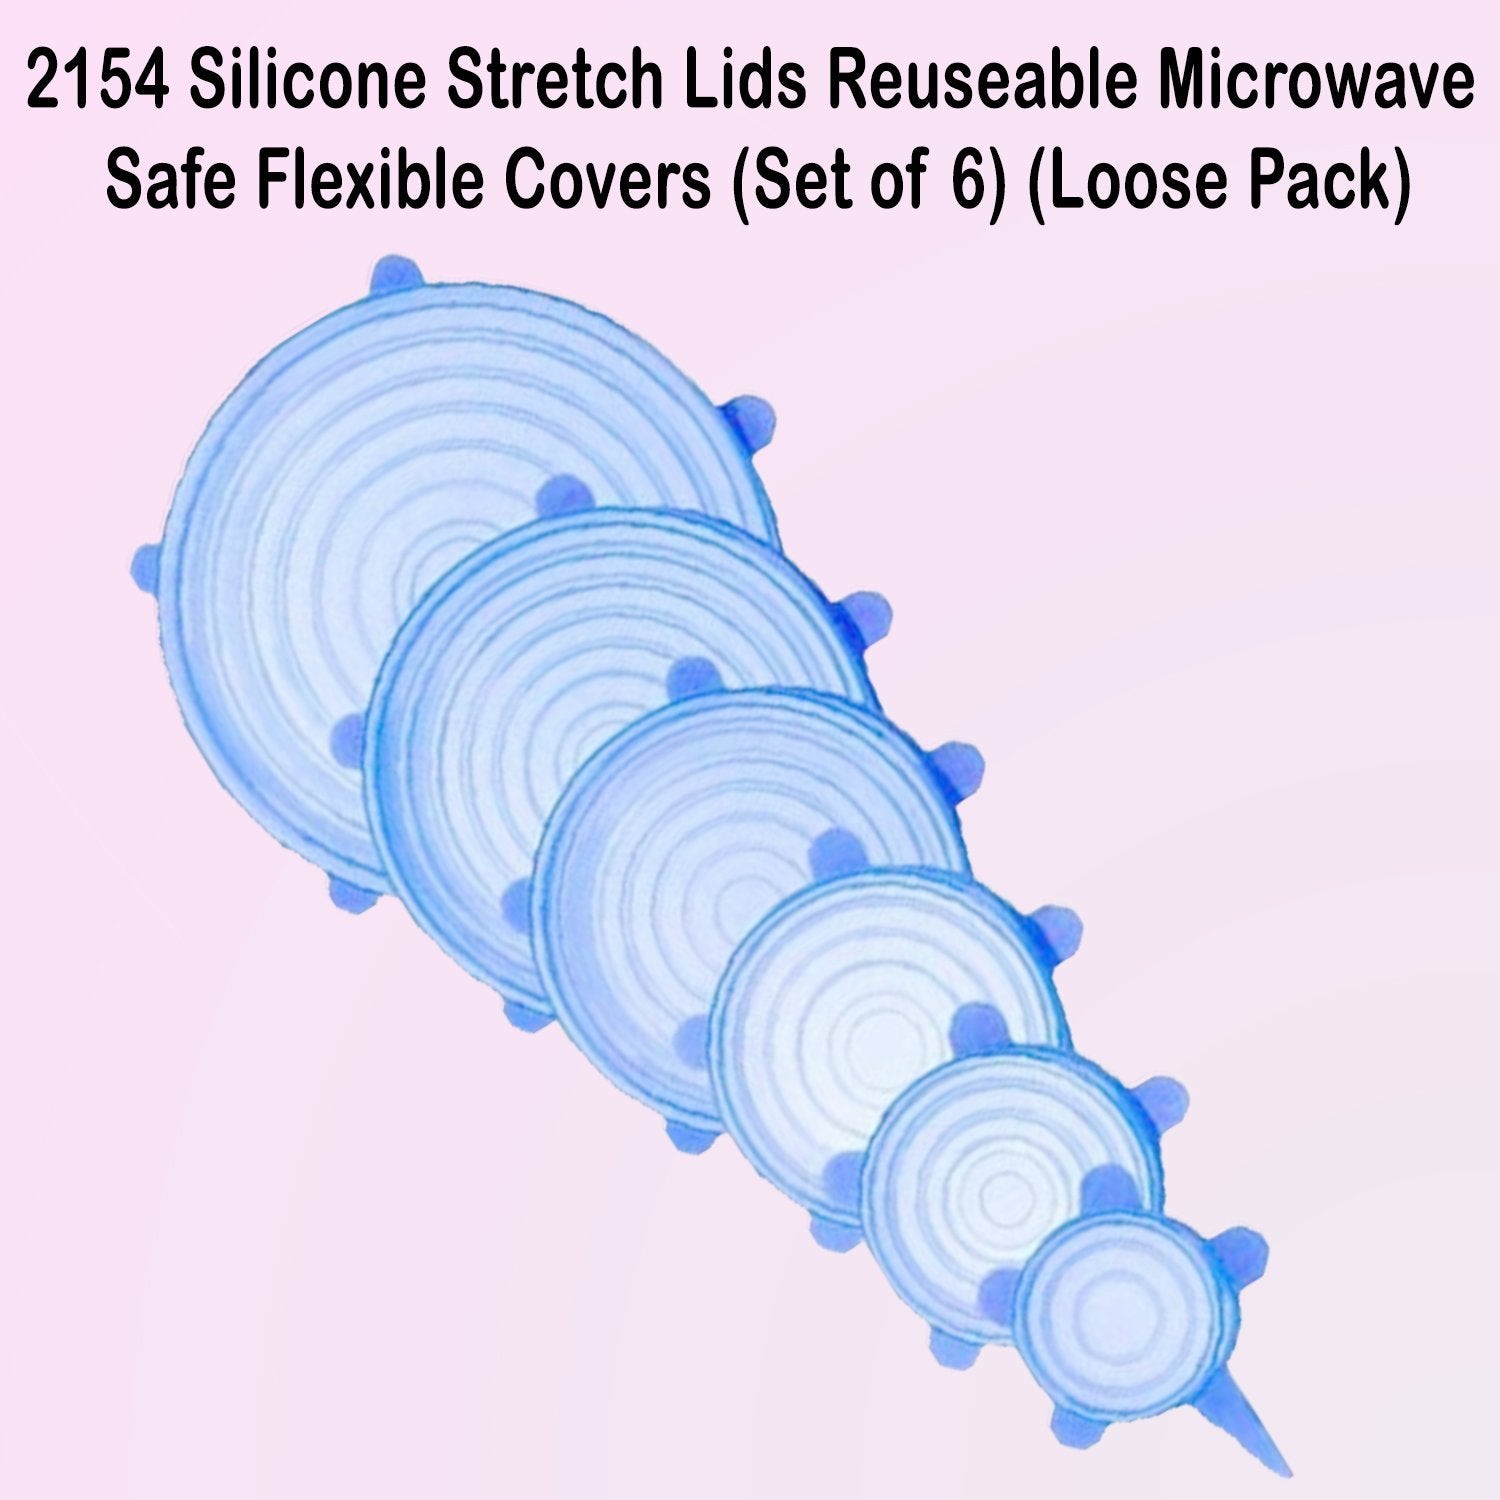 2154 premium silicone stretch lids reuseable microwave safe flexible covers set of 6